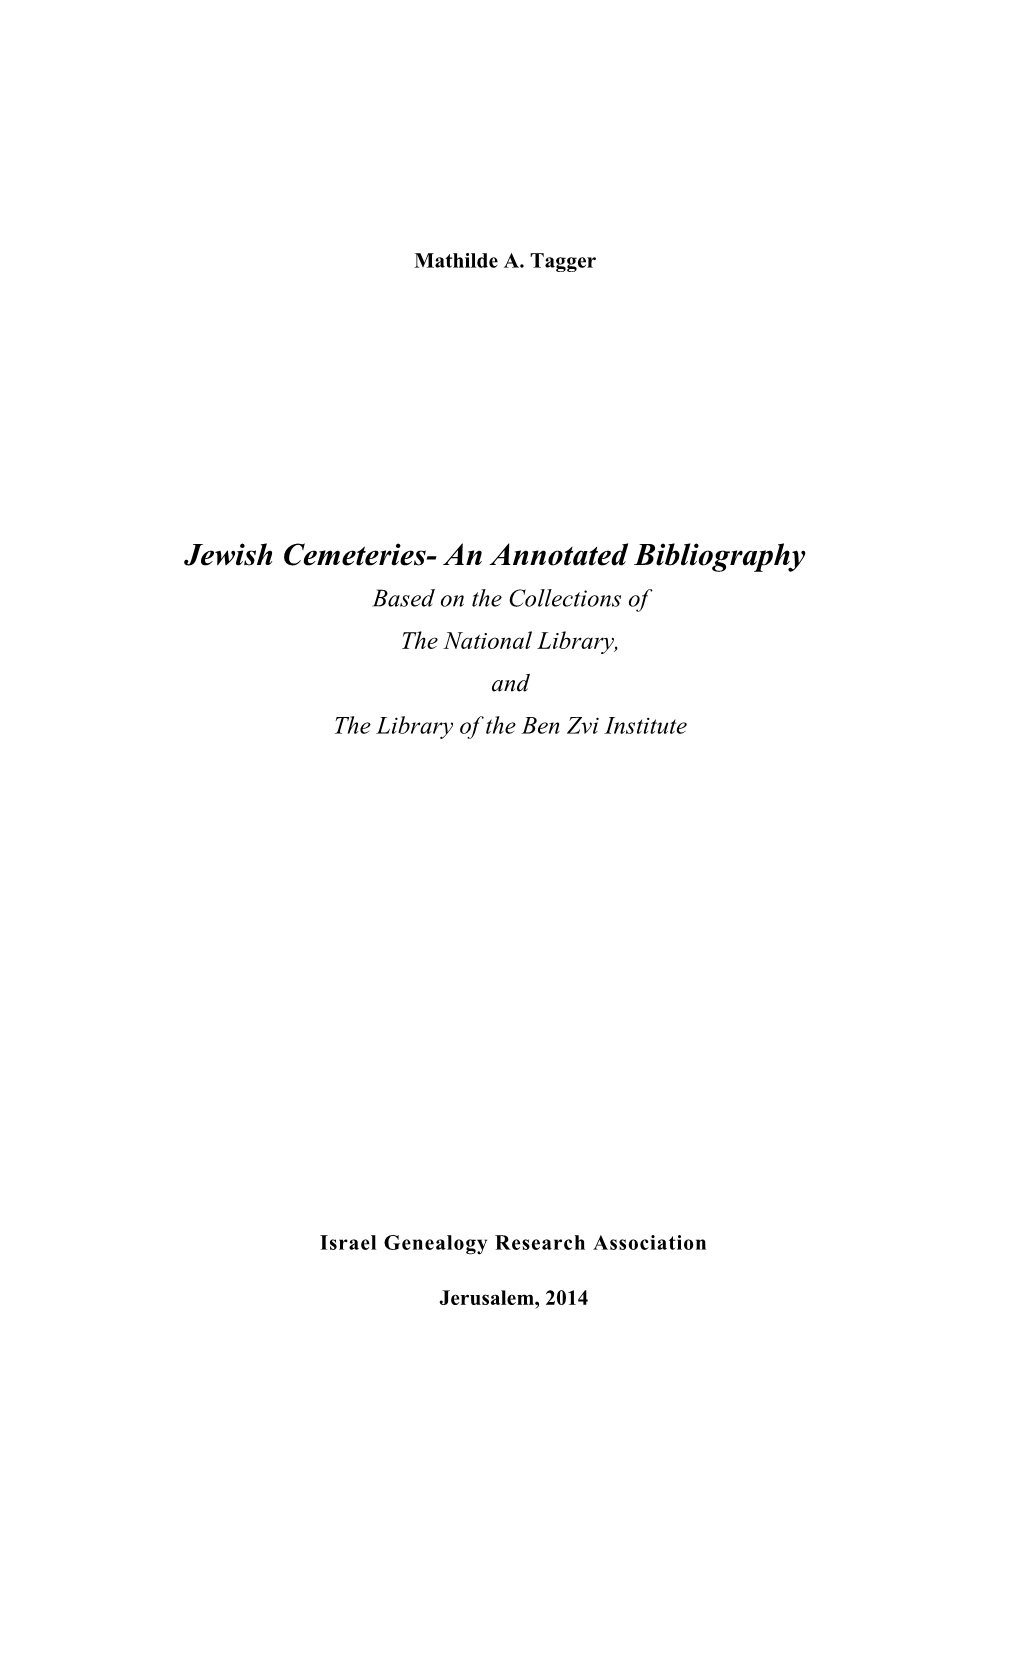 Jewish Cemeteries- an Annotated Bibliography Based on the Collections of the National Library, and the Library of the Ben Zvi Institute